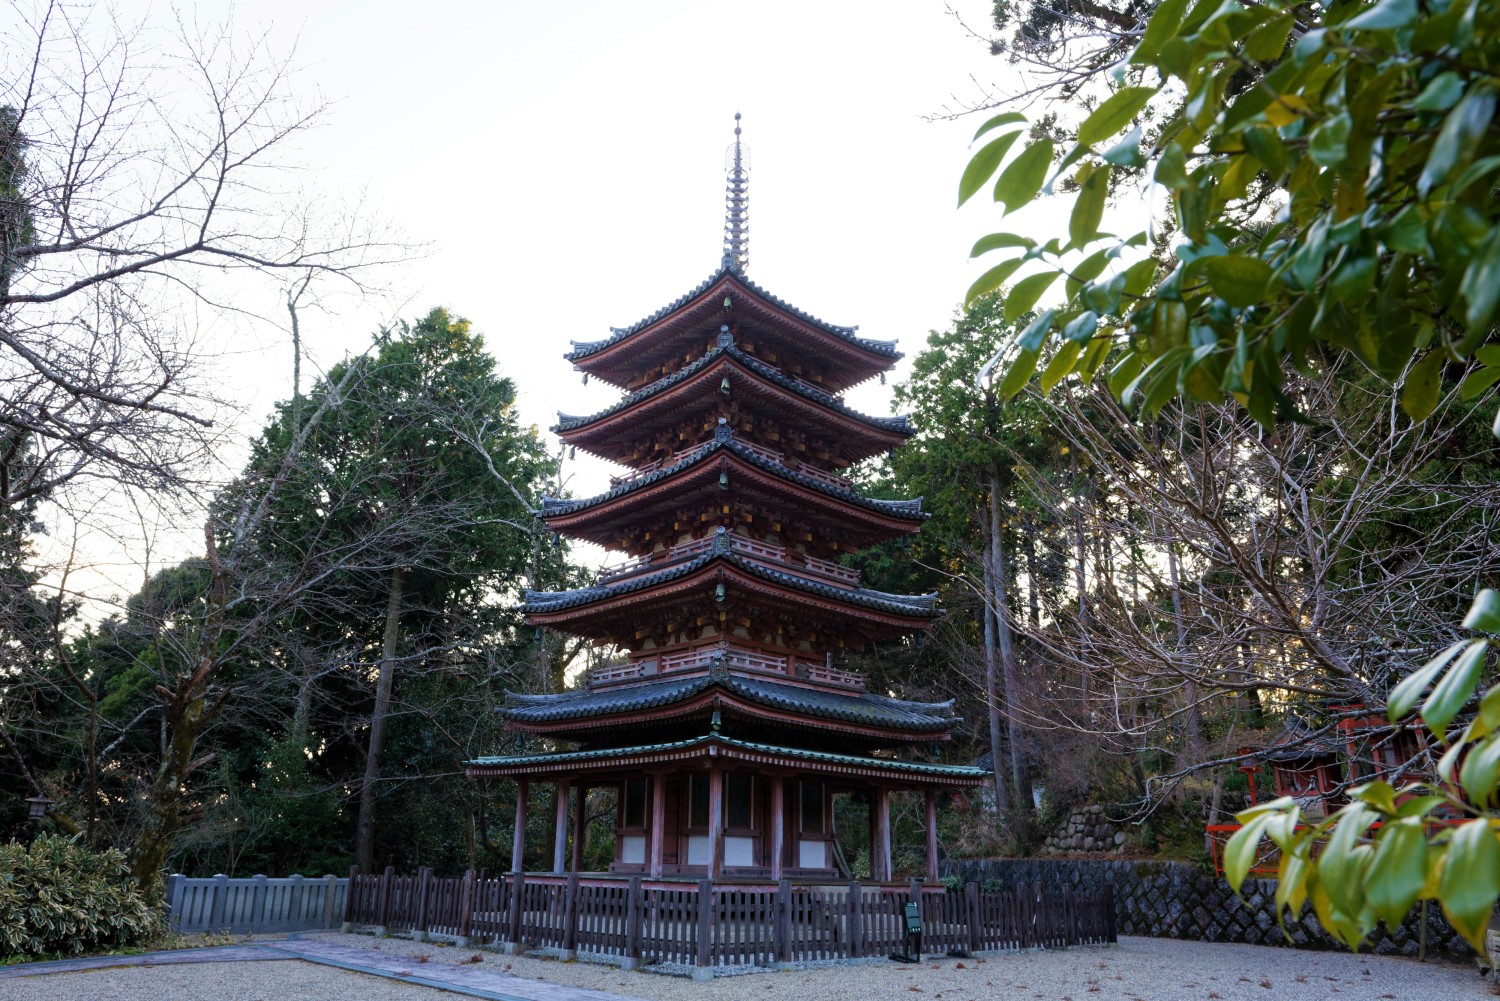 The Five-storied Pagoda